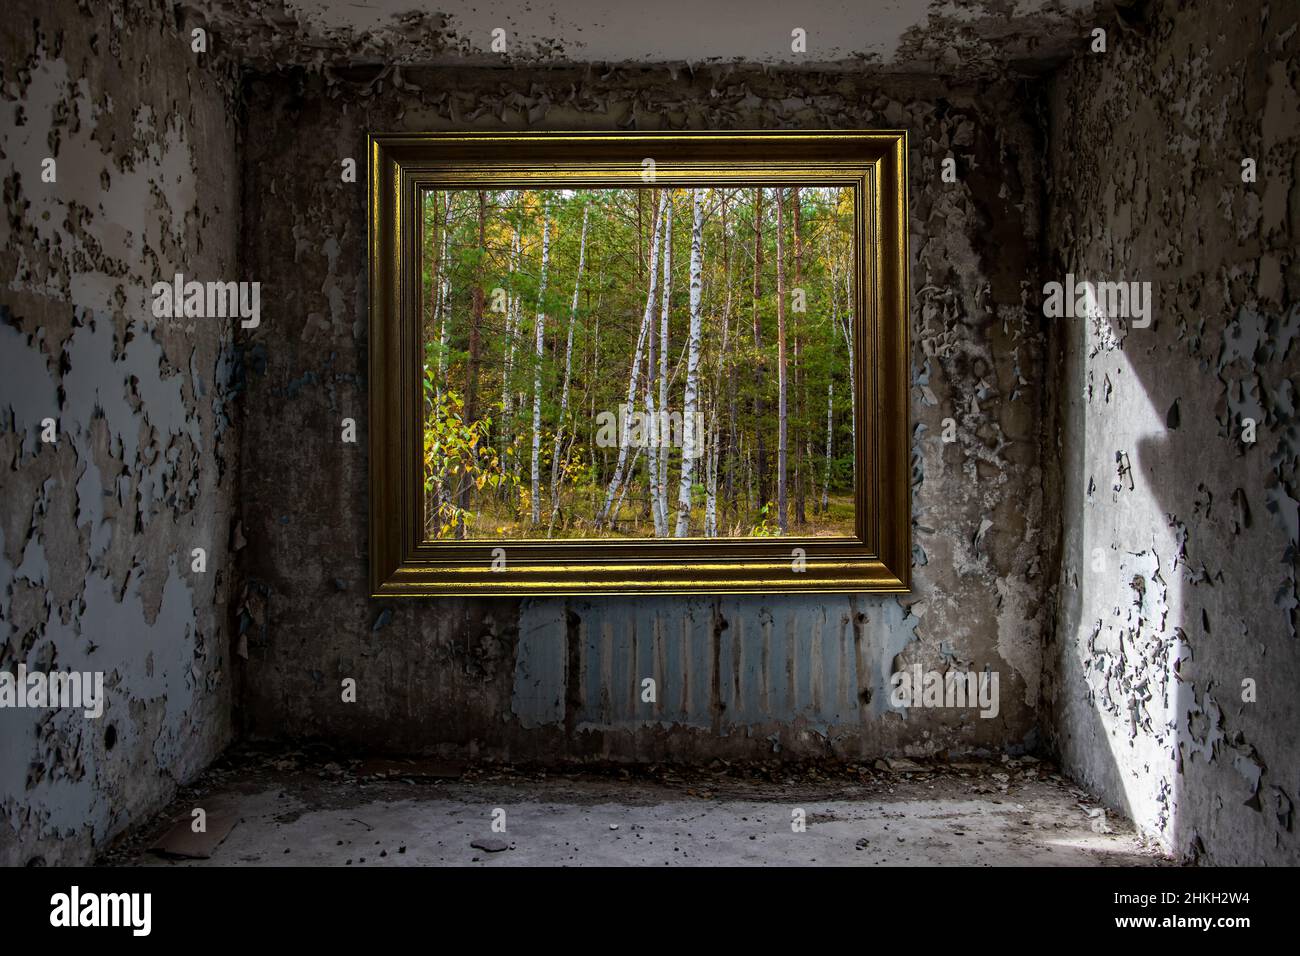 The view of a forest inside a image frame on the wall in an abandoned damaged room. Stock Photo